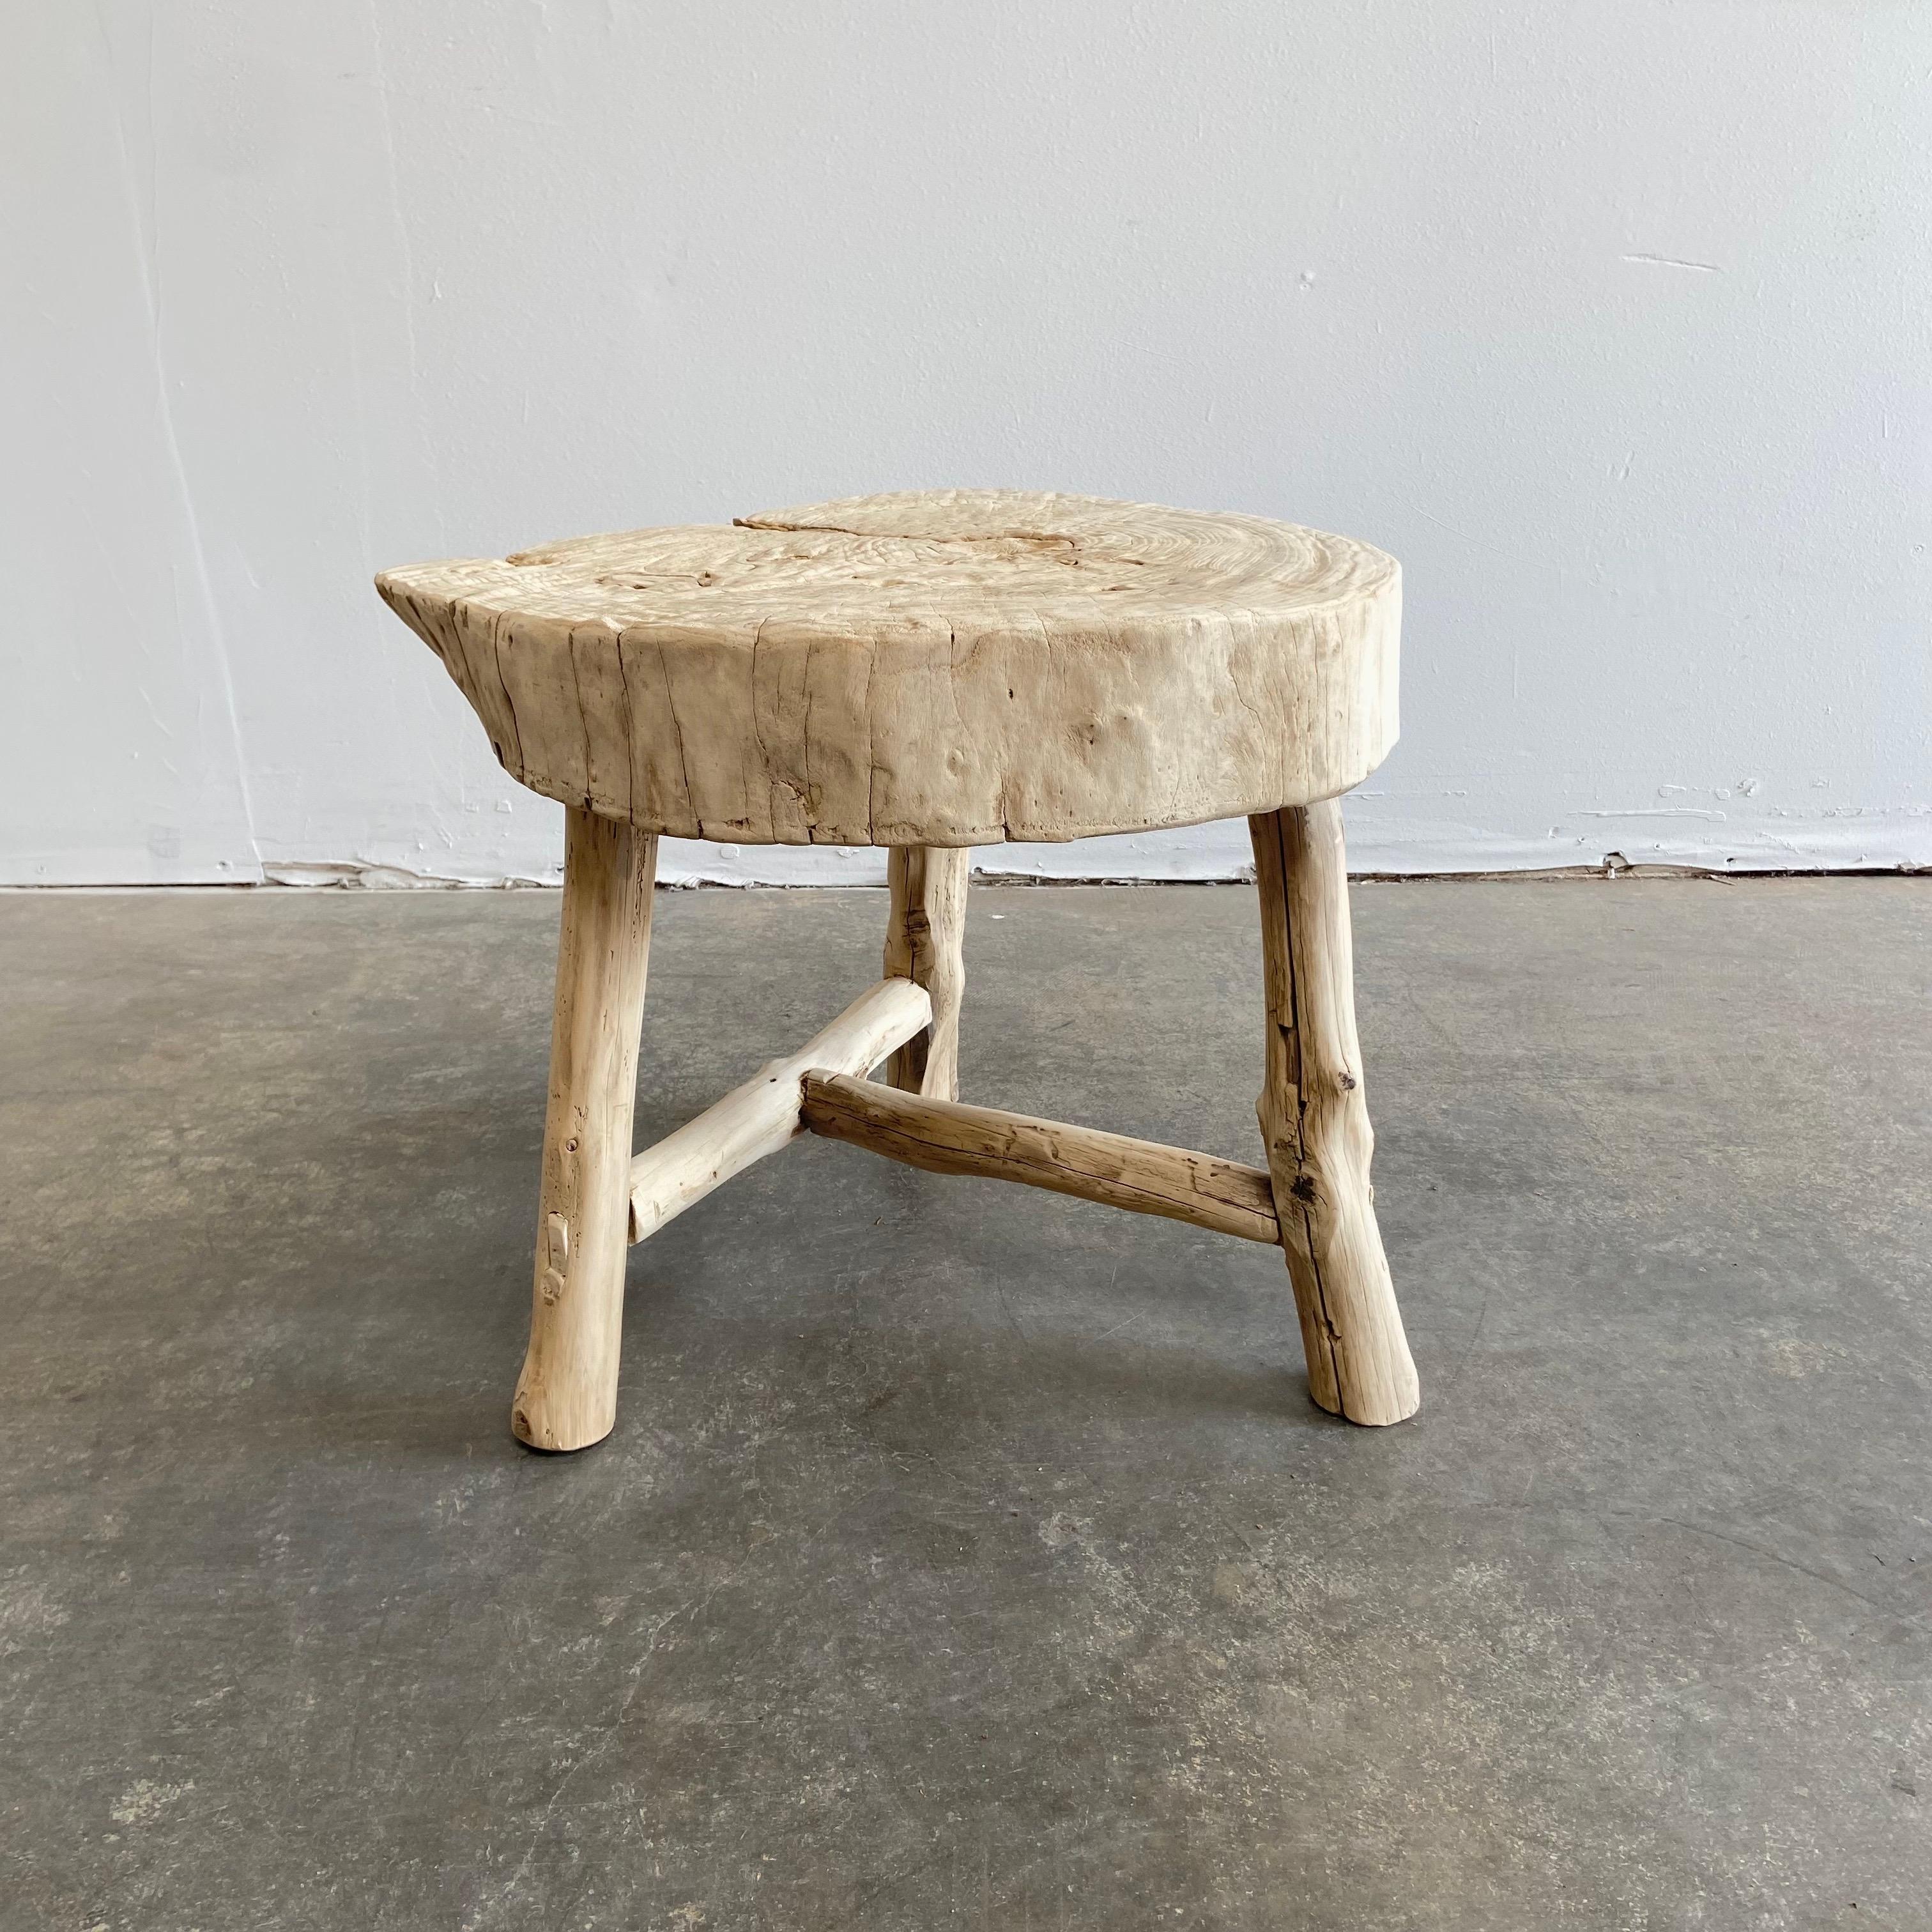 This beautiful rustic side table was crafted from
a cypress log, made with rustic style legs. Its great for that mountain cabin, or beach house.
Rd stump side table 20” W x 19” D x 19” H.